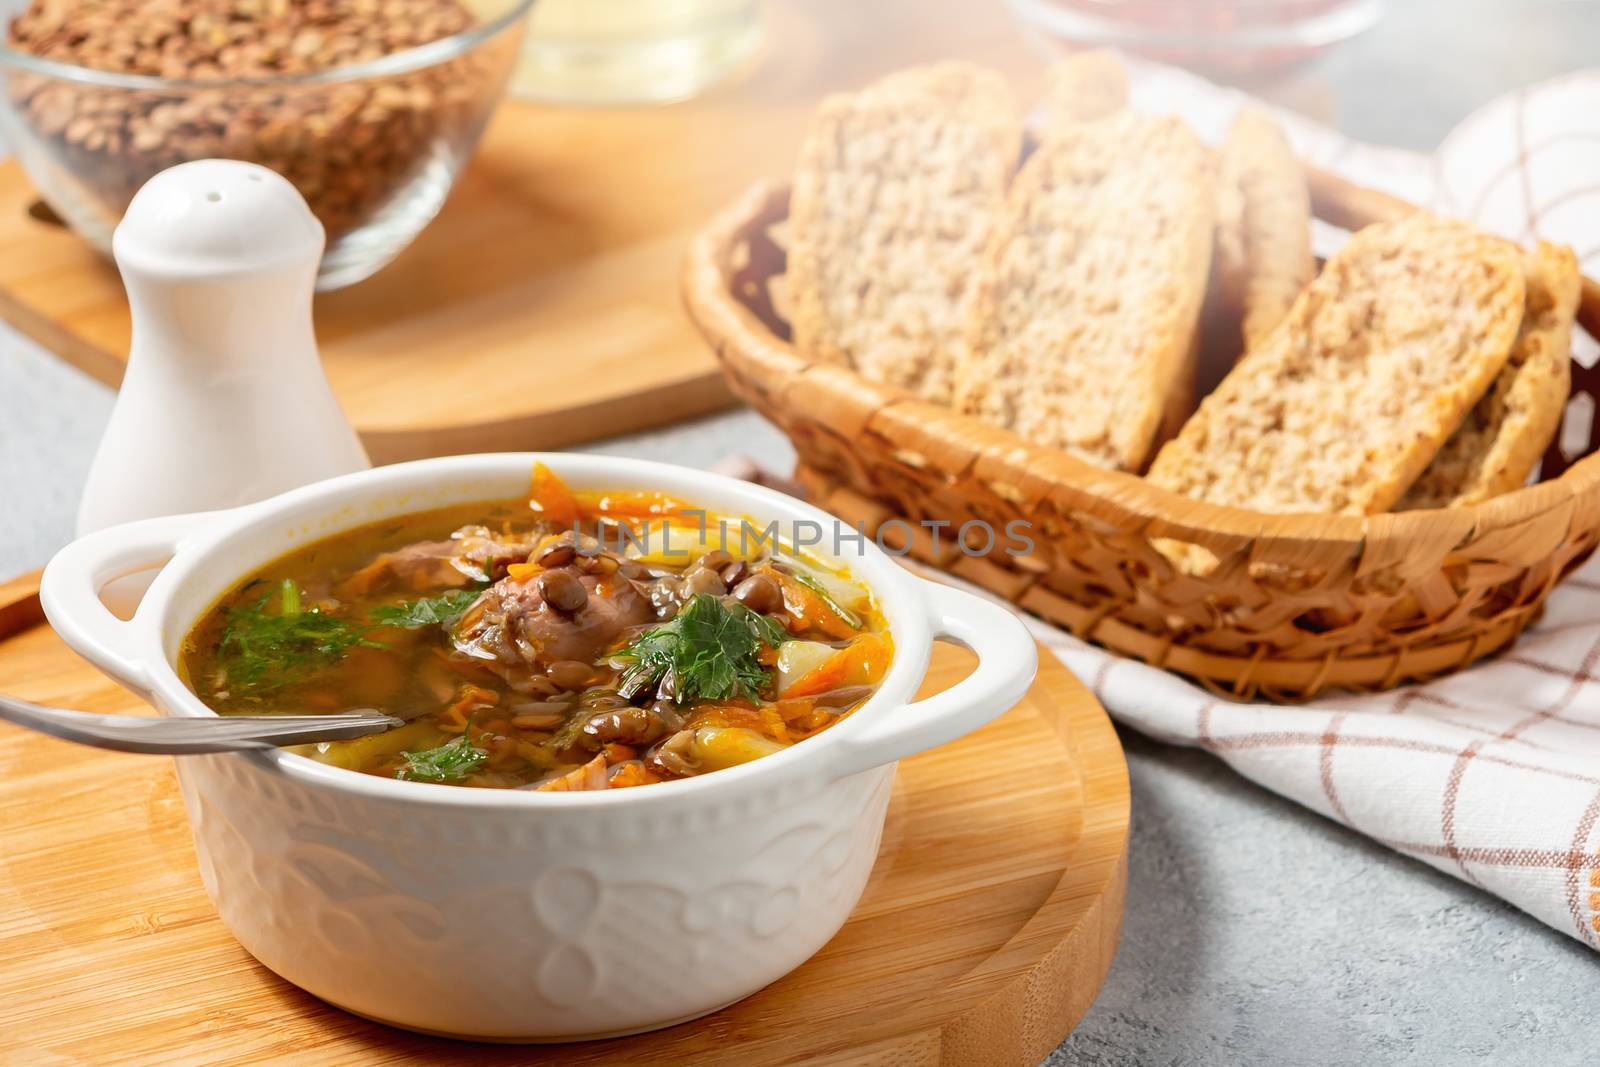 Lentil soup with chicken in a white bowl on a wooden board.